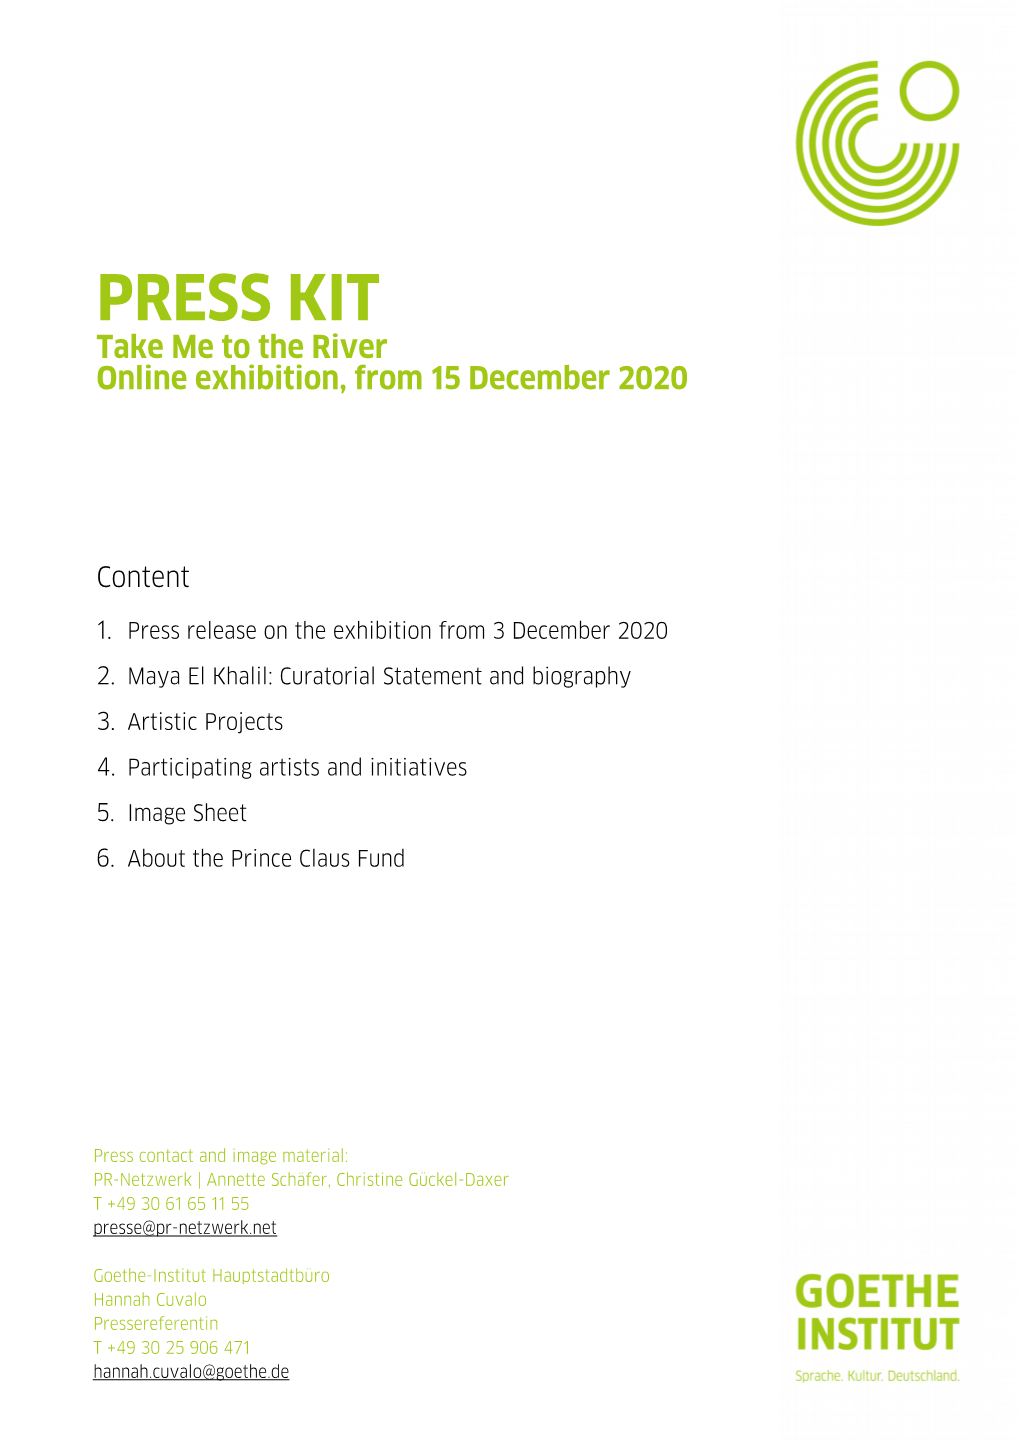 PRESS KIT Take Me to the River Online Exhibition, from 15 December 2020